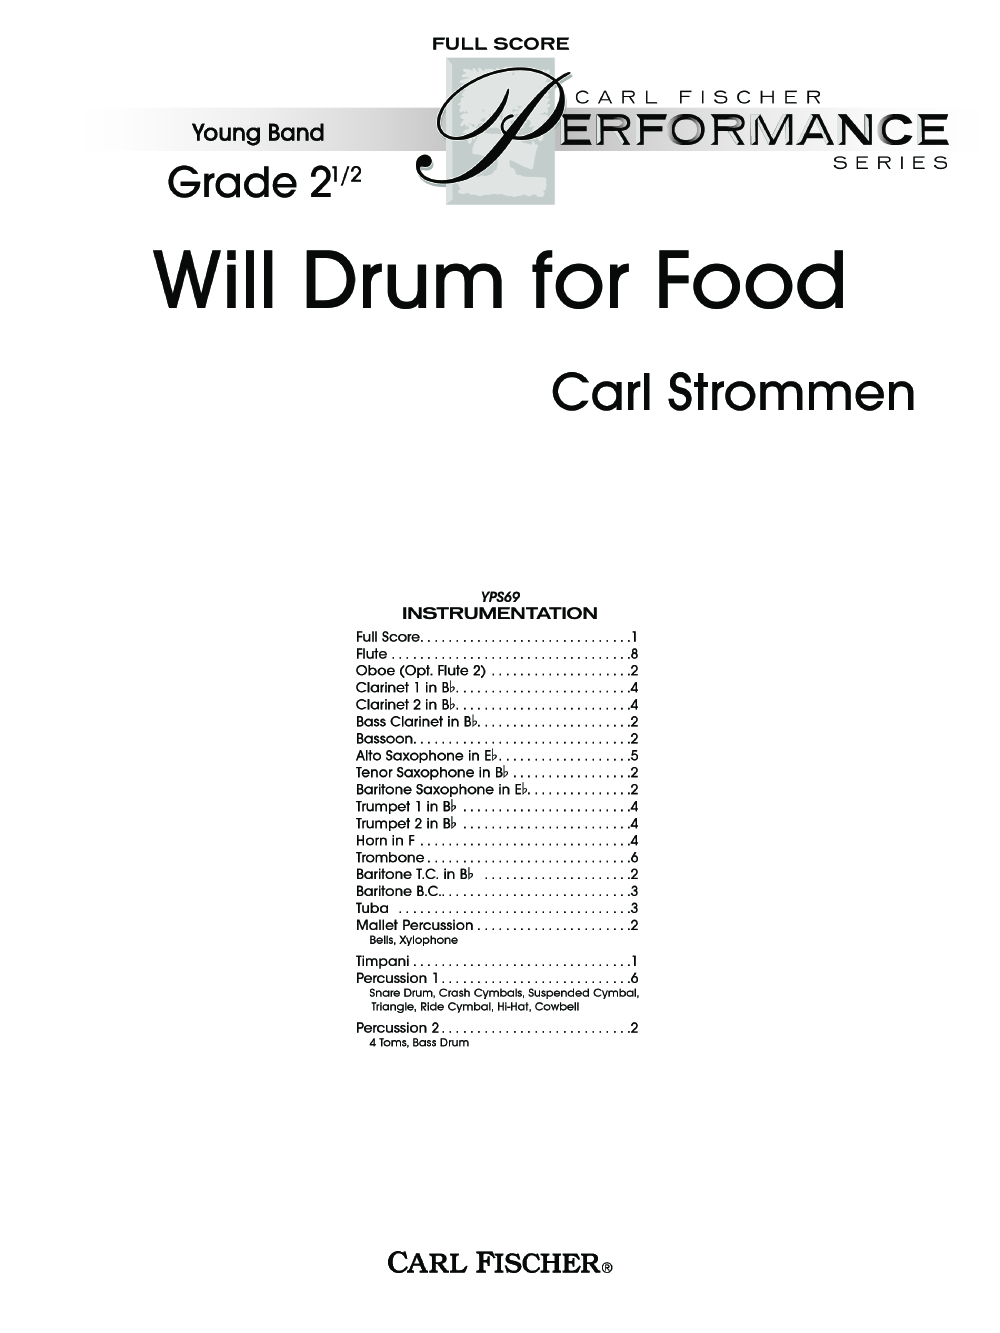 WILL DRUM FOR FOOD